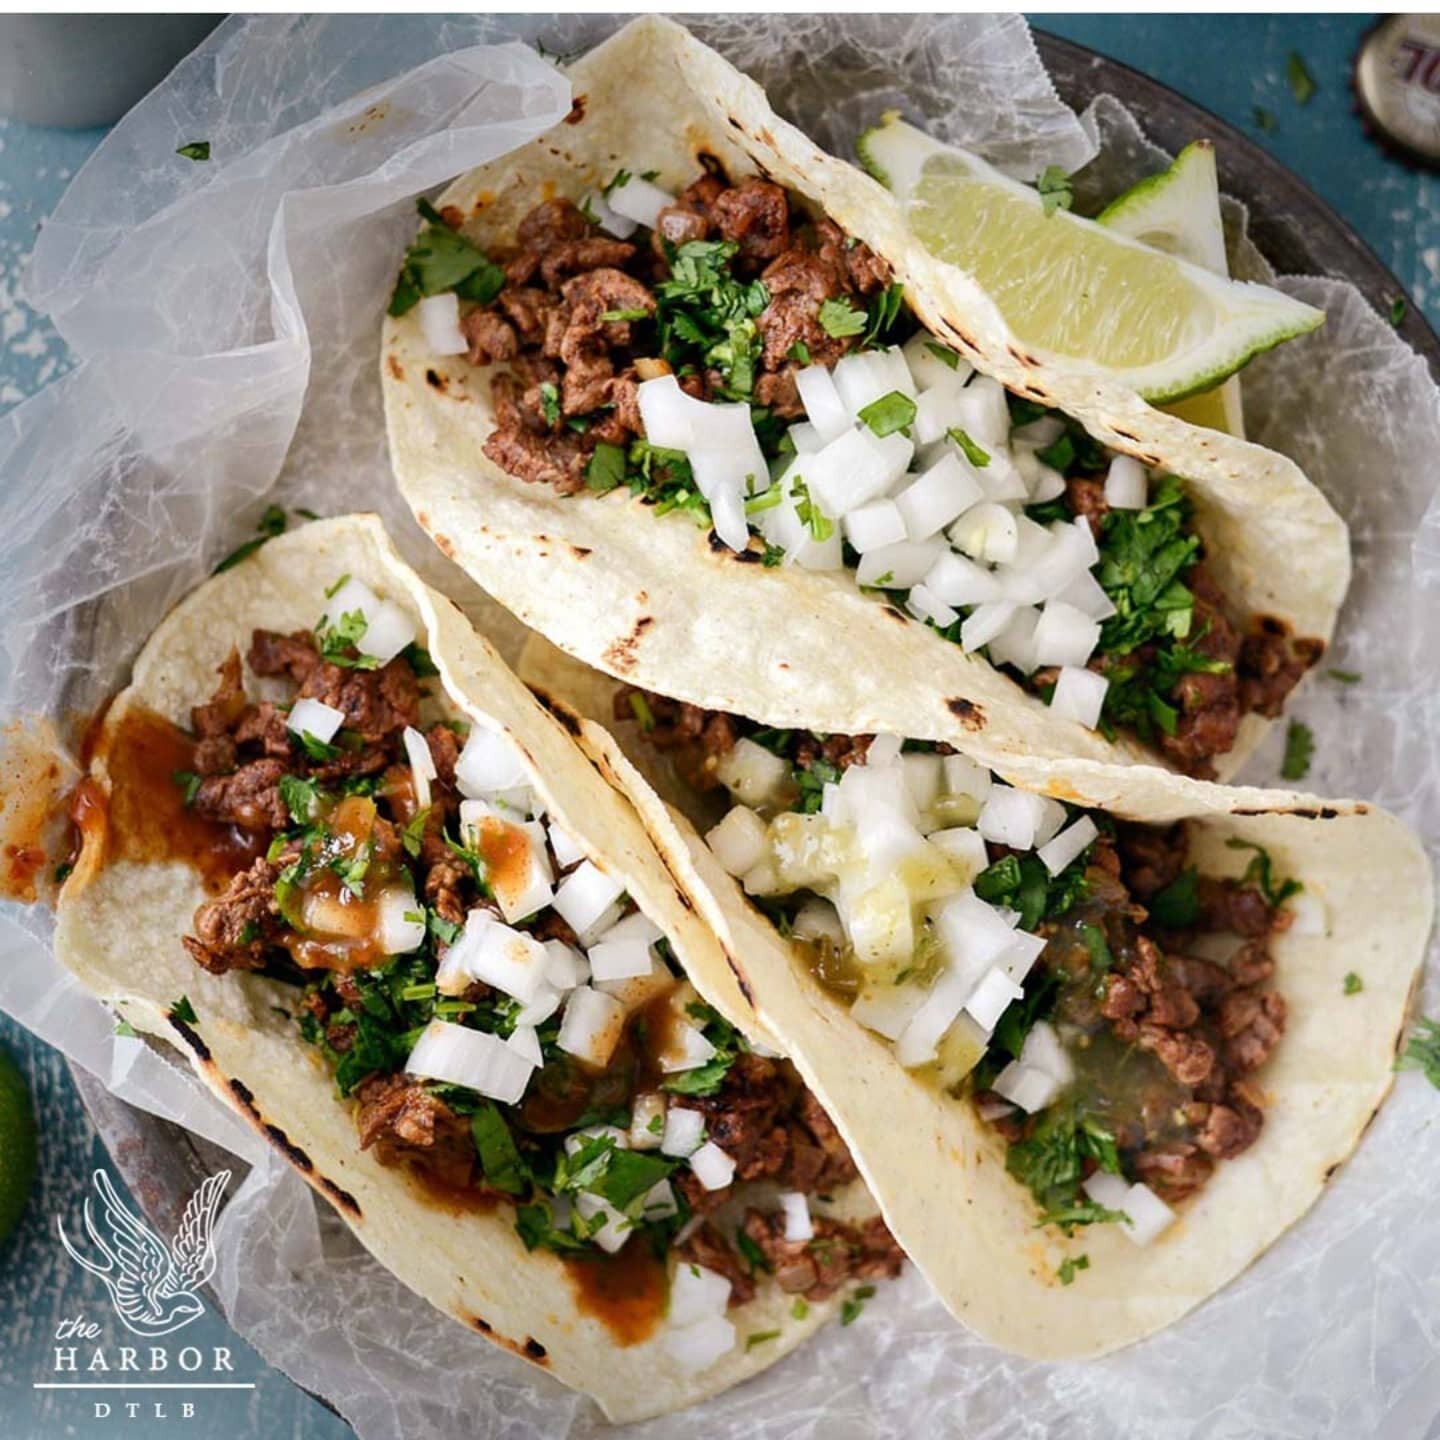 Is it too Early to start thinking about Tacos? 🤔 Never! 🌮TACO TUESDAY! 🌮2 For $5...OPEN TILL CLOSE! 
.
⚠️Mix and Match your favorites!👍| Happy Hour 4PM-8PM🍻
.
.
.
.
.
.
#Tuesday #Tacos #Tacolife #Tacogd #mexican #plantbased #vegan #happyhour #No